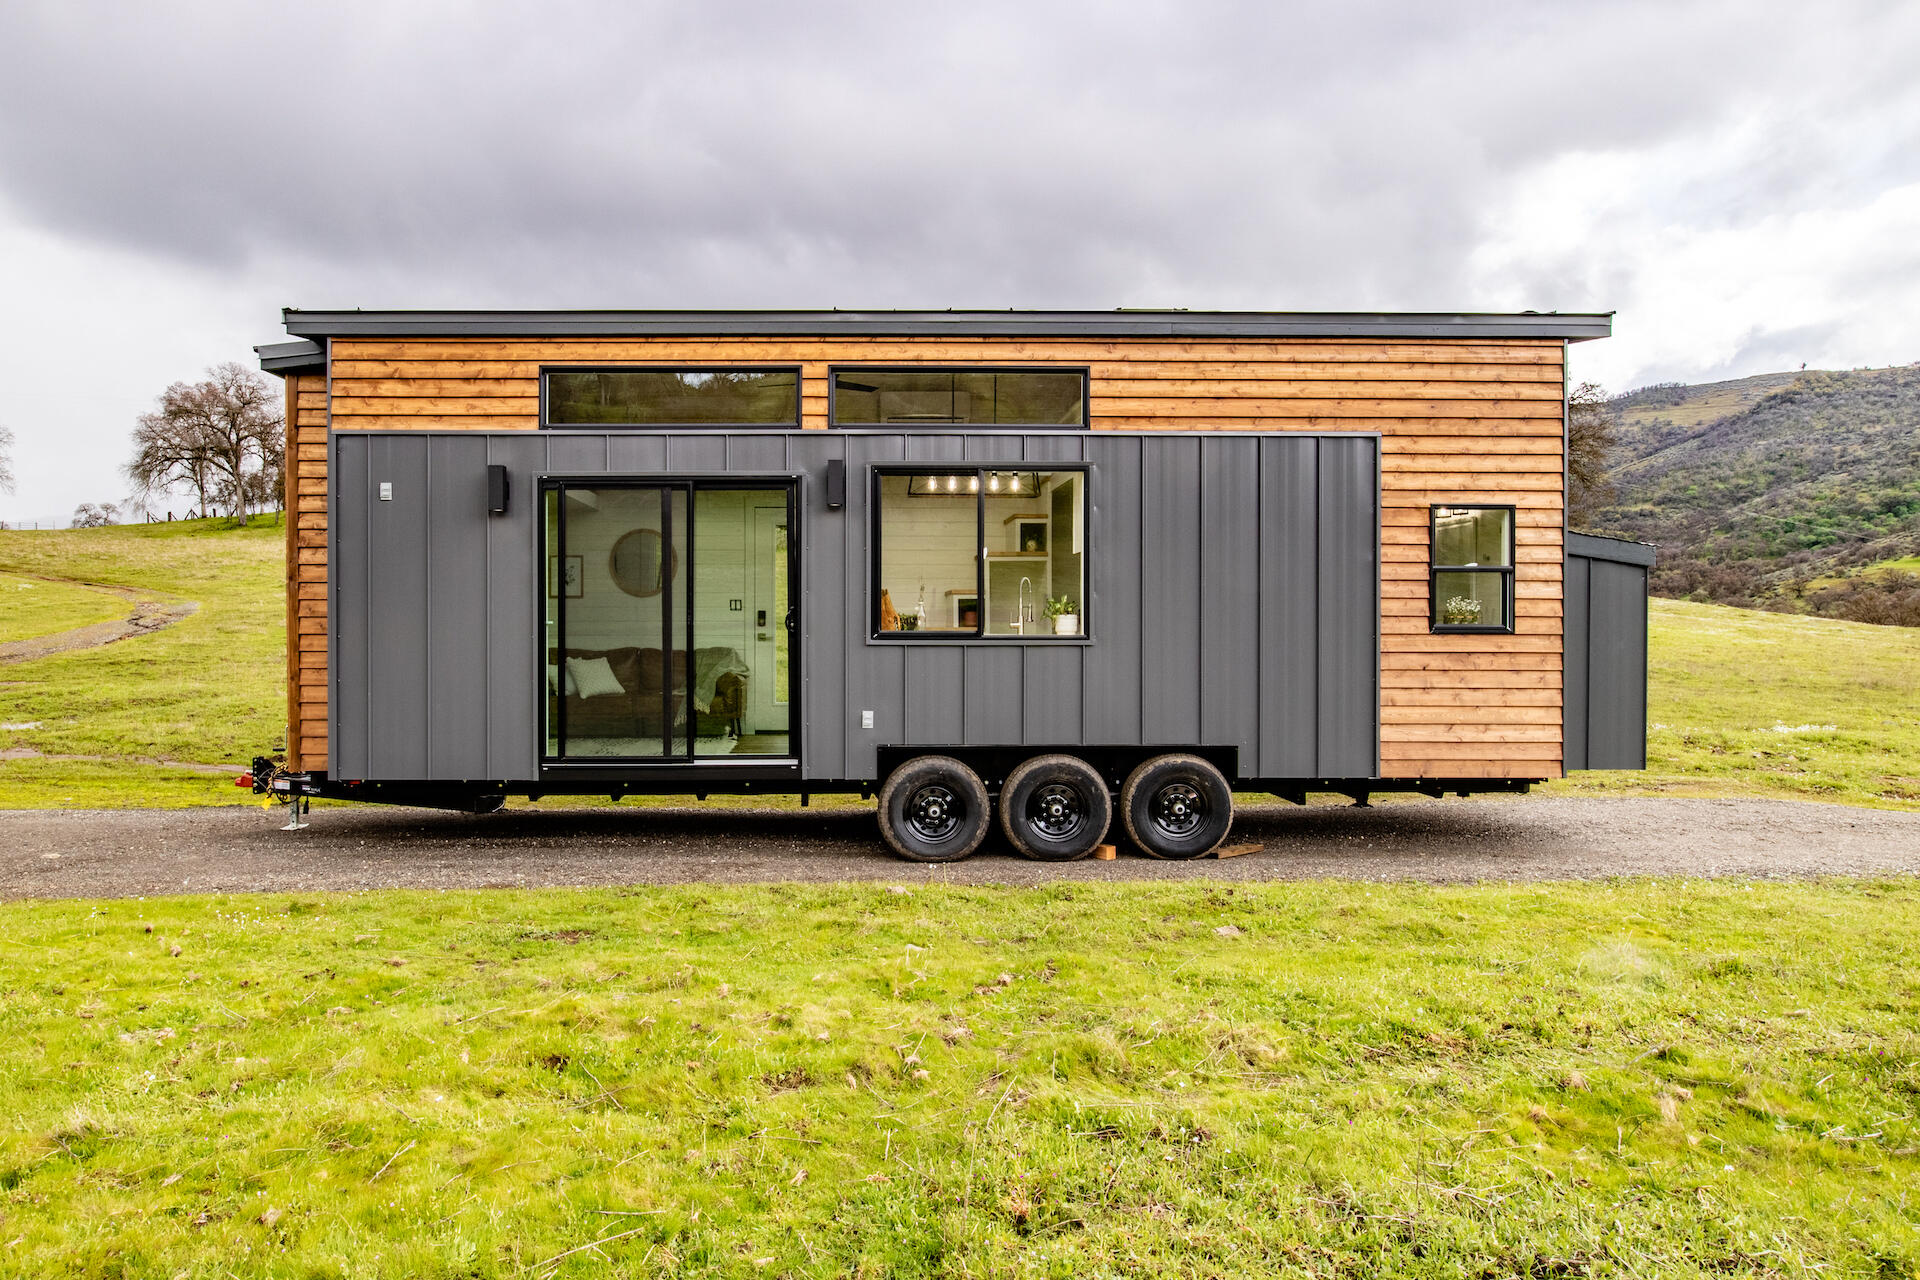 Jt Collective S First Tiny House Design Lets You Simplify Your Life Yet Live Comfortably 216125 1 